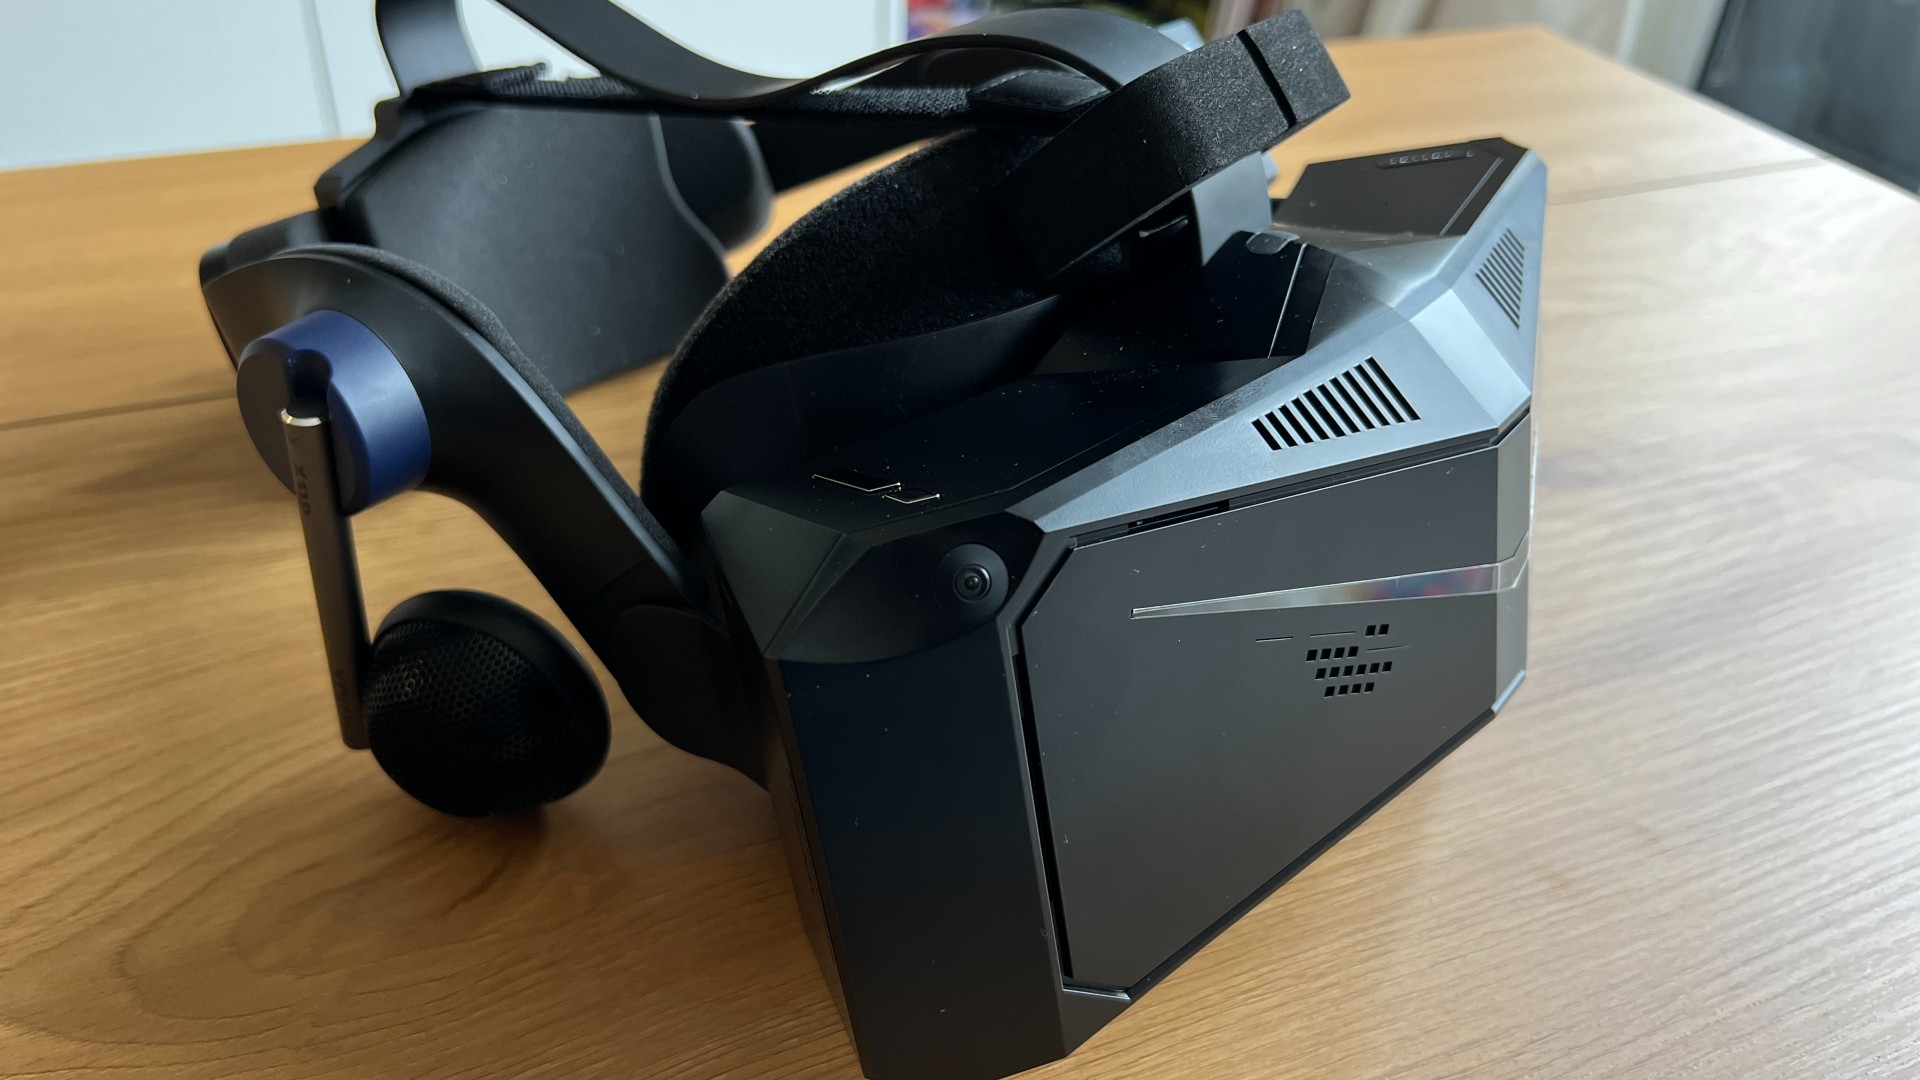 Pimax Crystal Review  The Next-Gen VR Simulation Experience